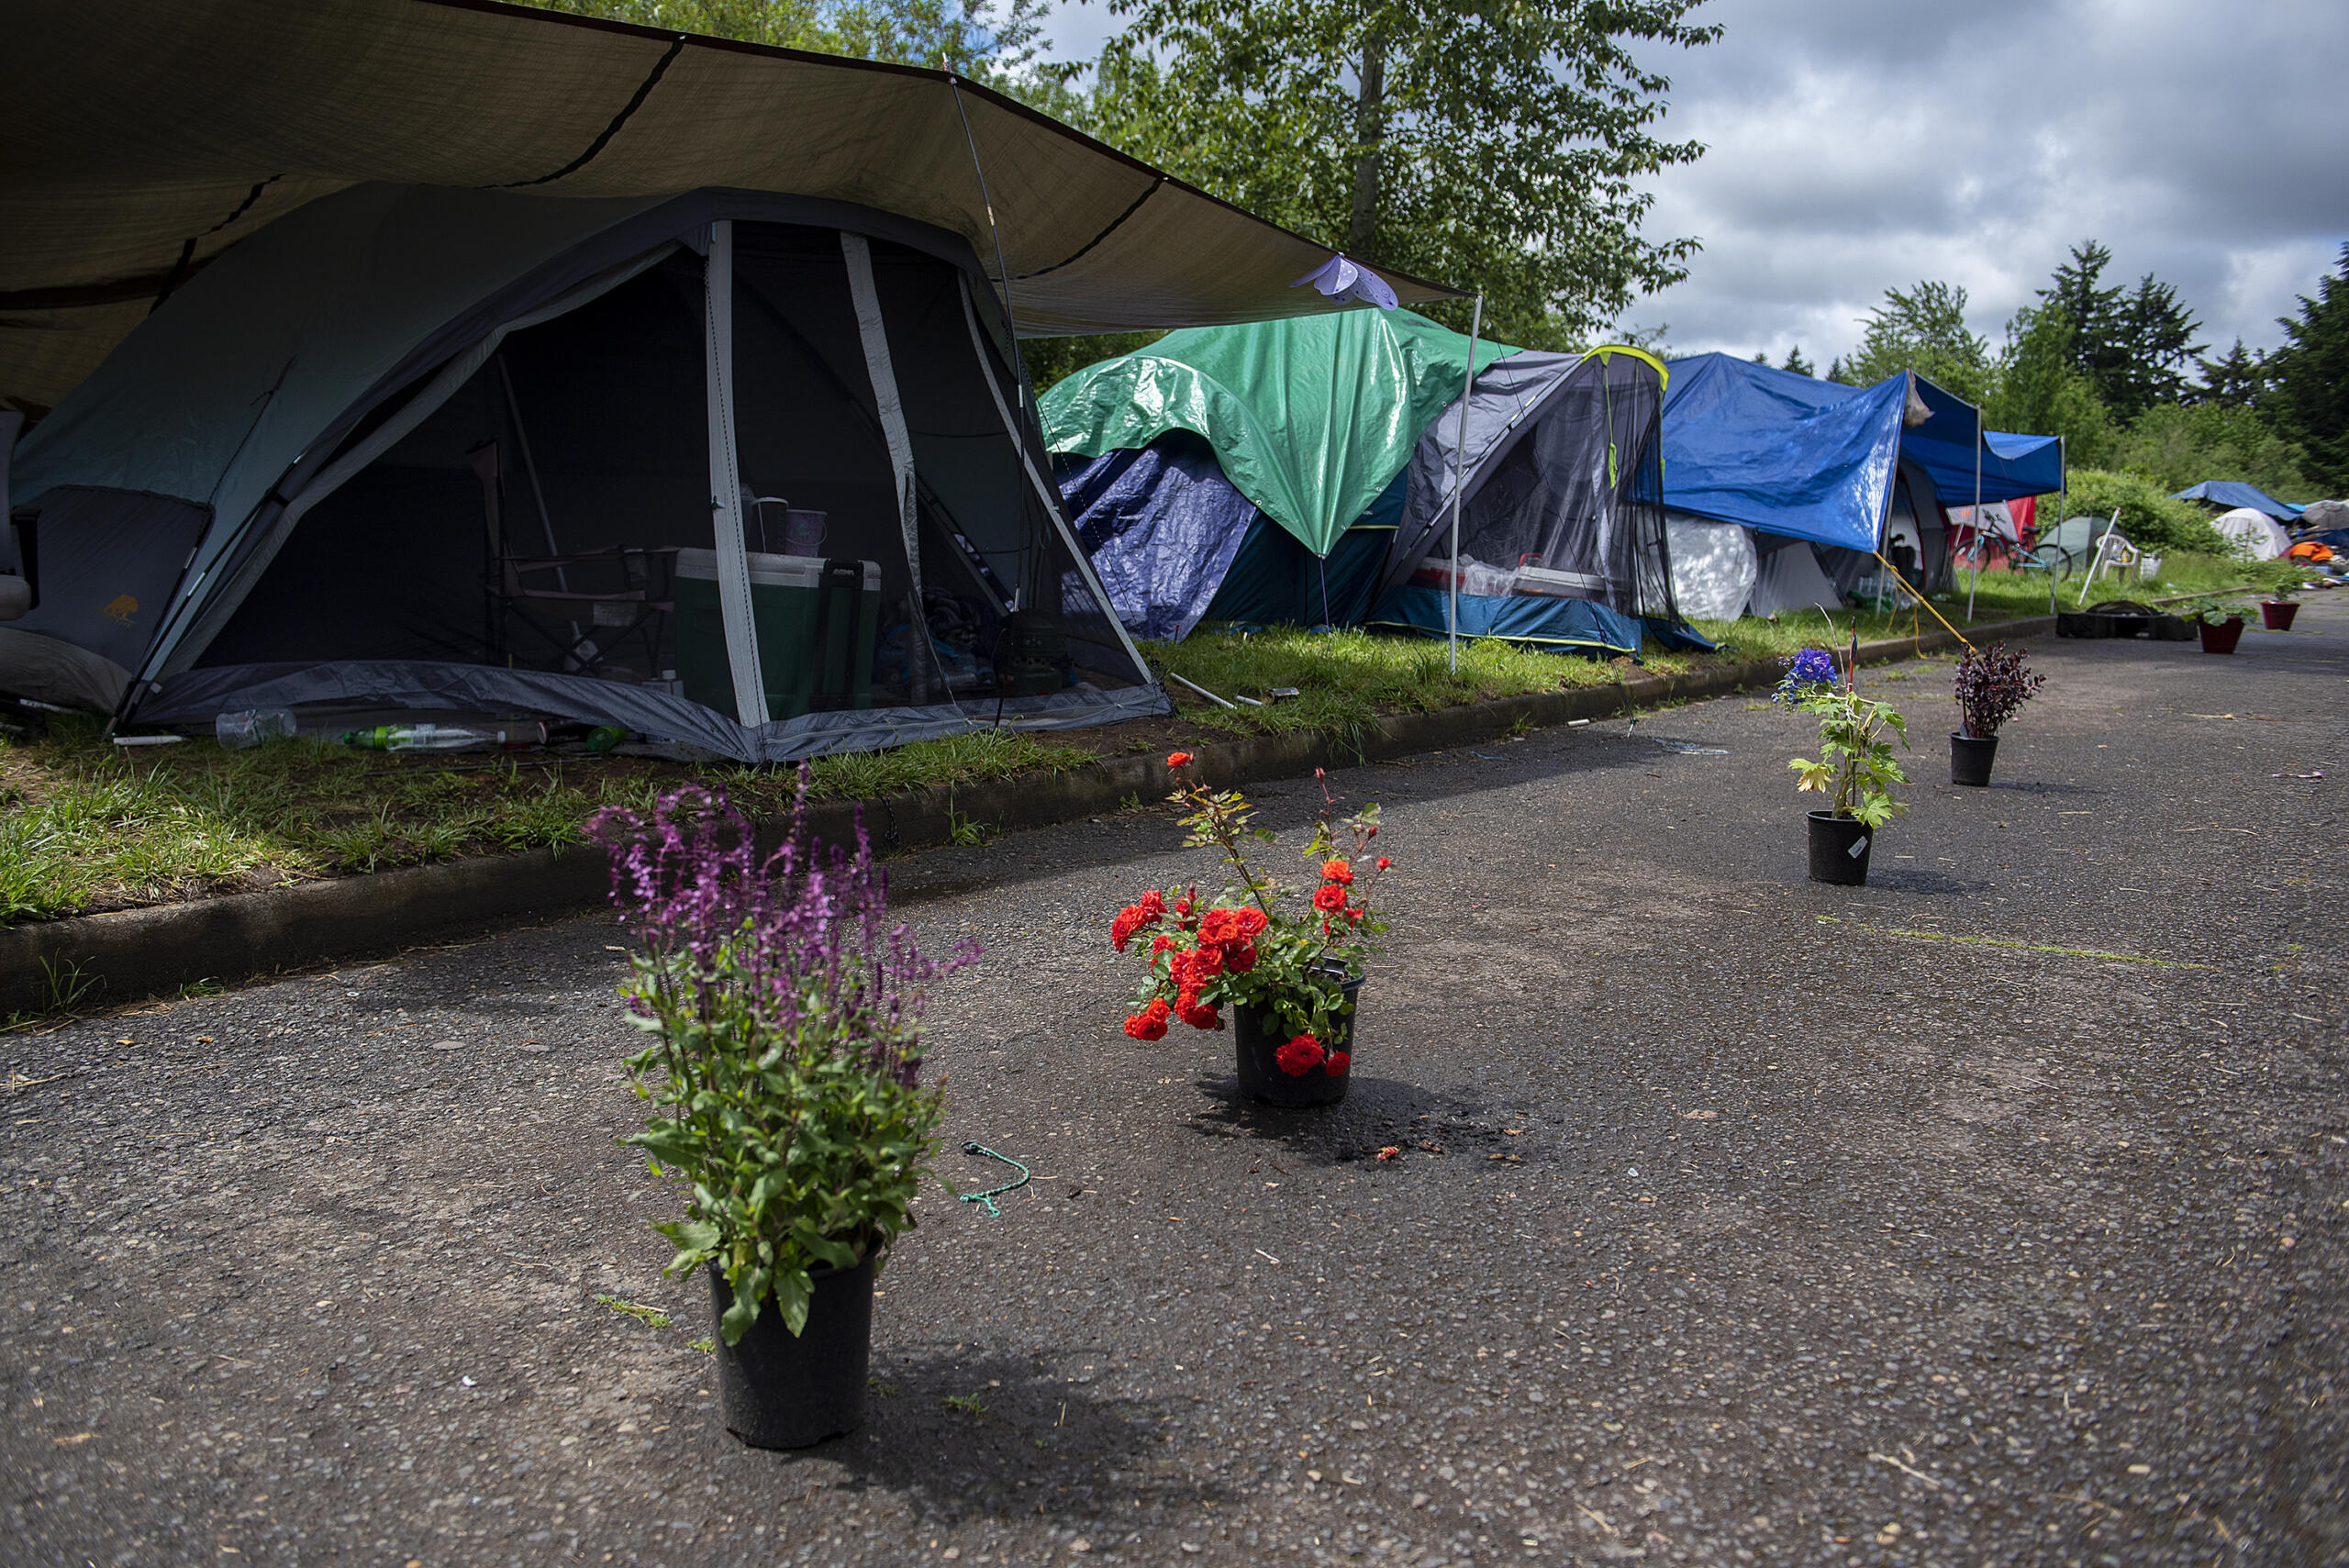 Springtime flowers brighten the day of residents at a homeless encampment In northeast Vancouver on Tuesday morning, May 25, 2021.